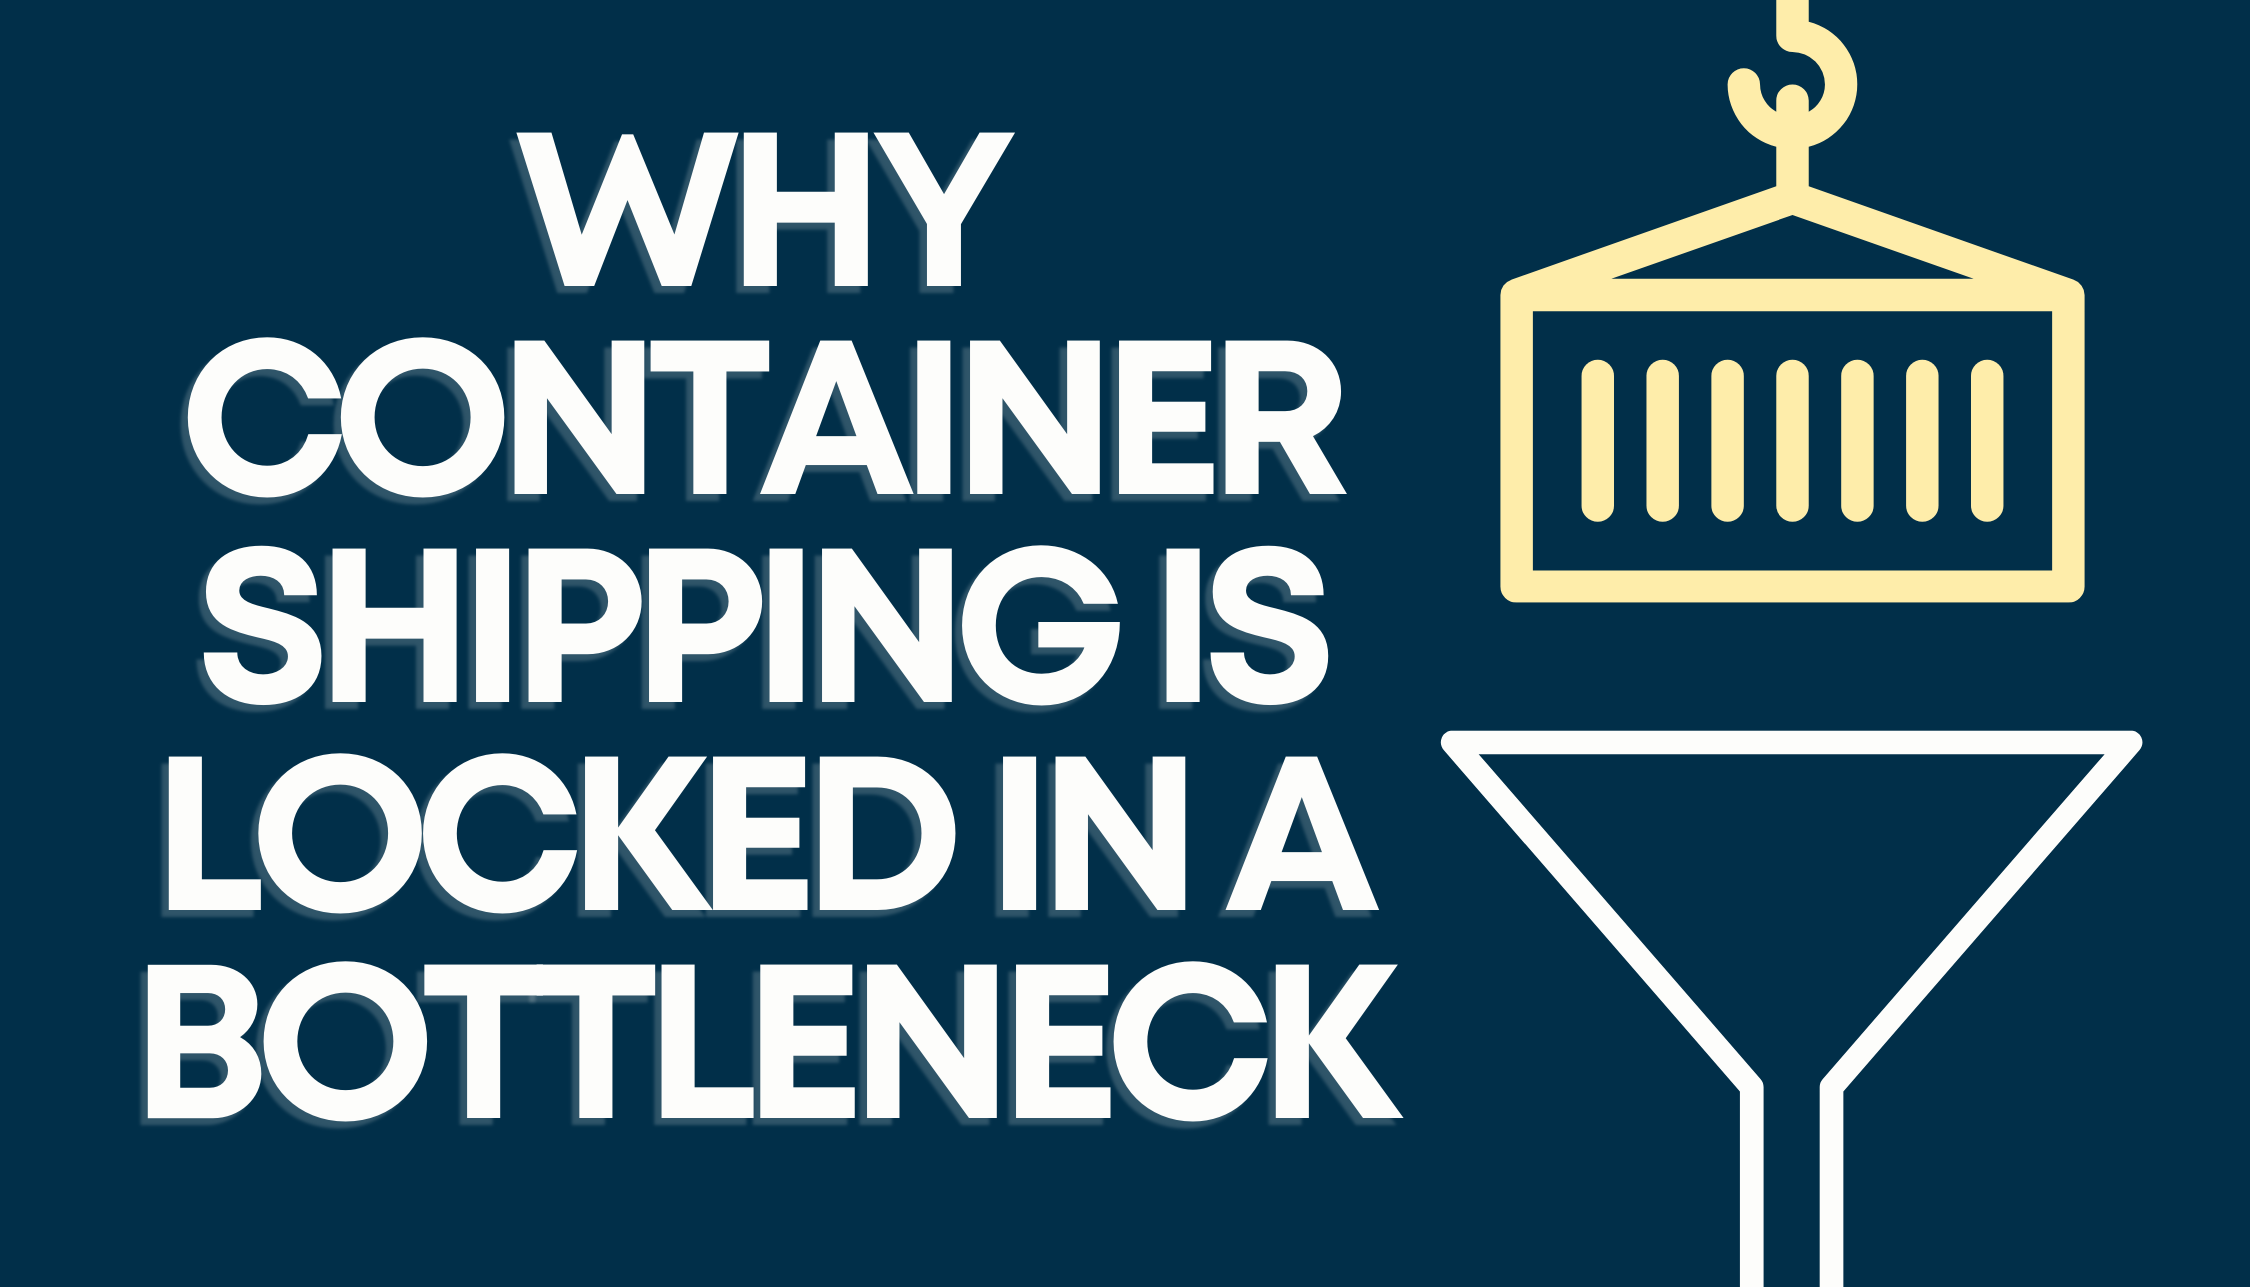 Why Container Shipping is Locked in a Bottleneck